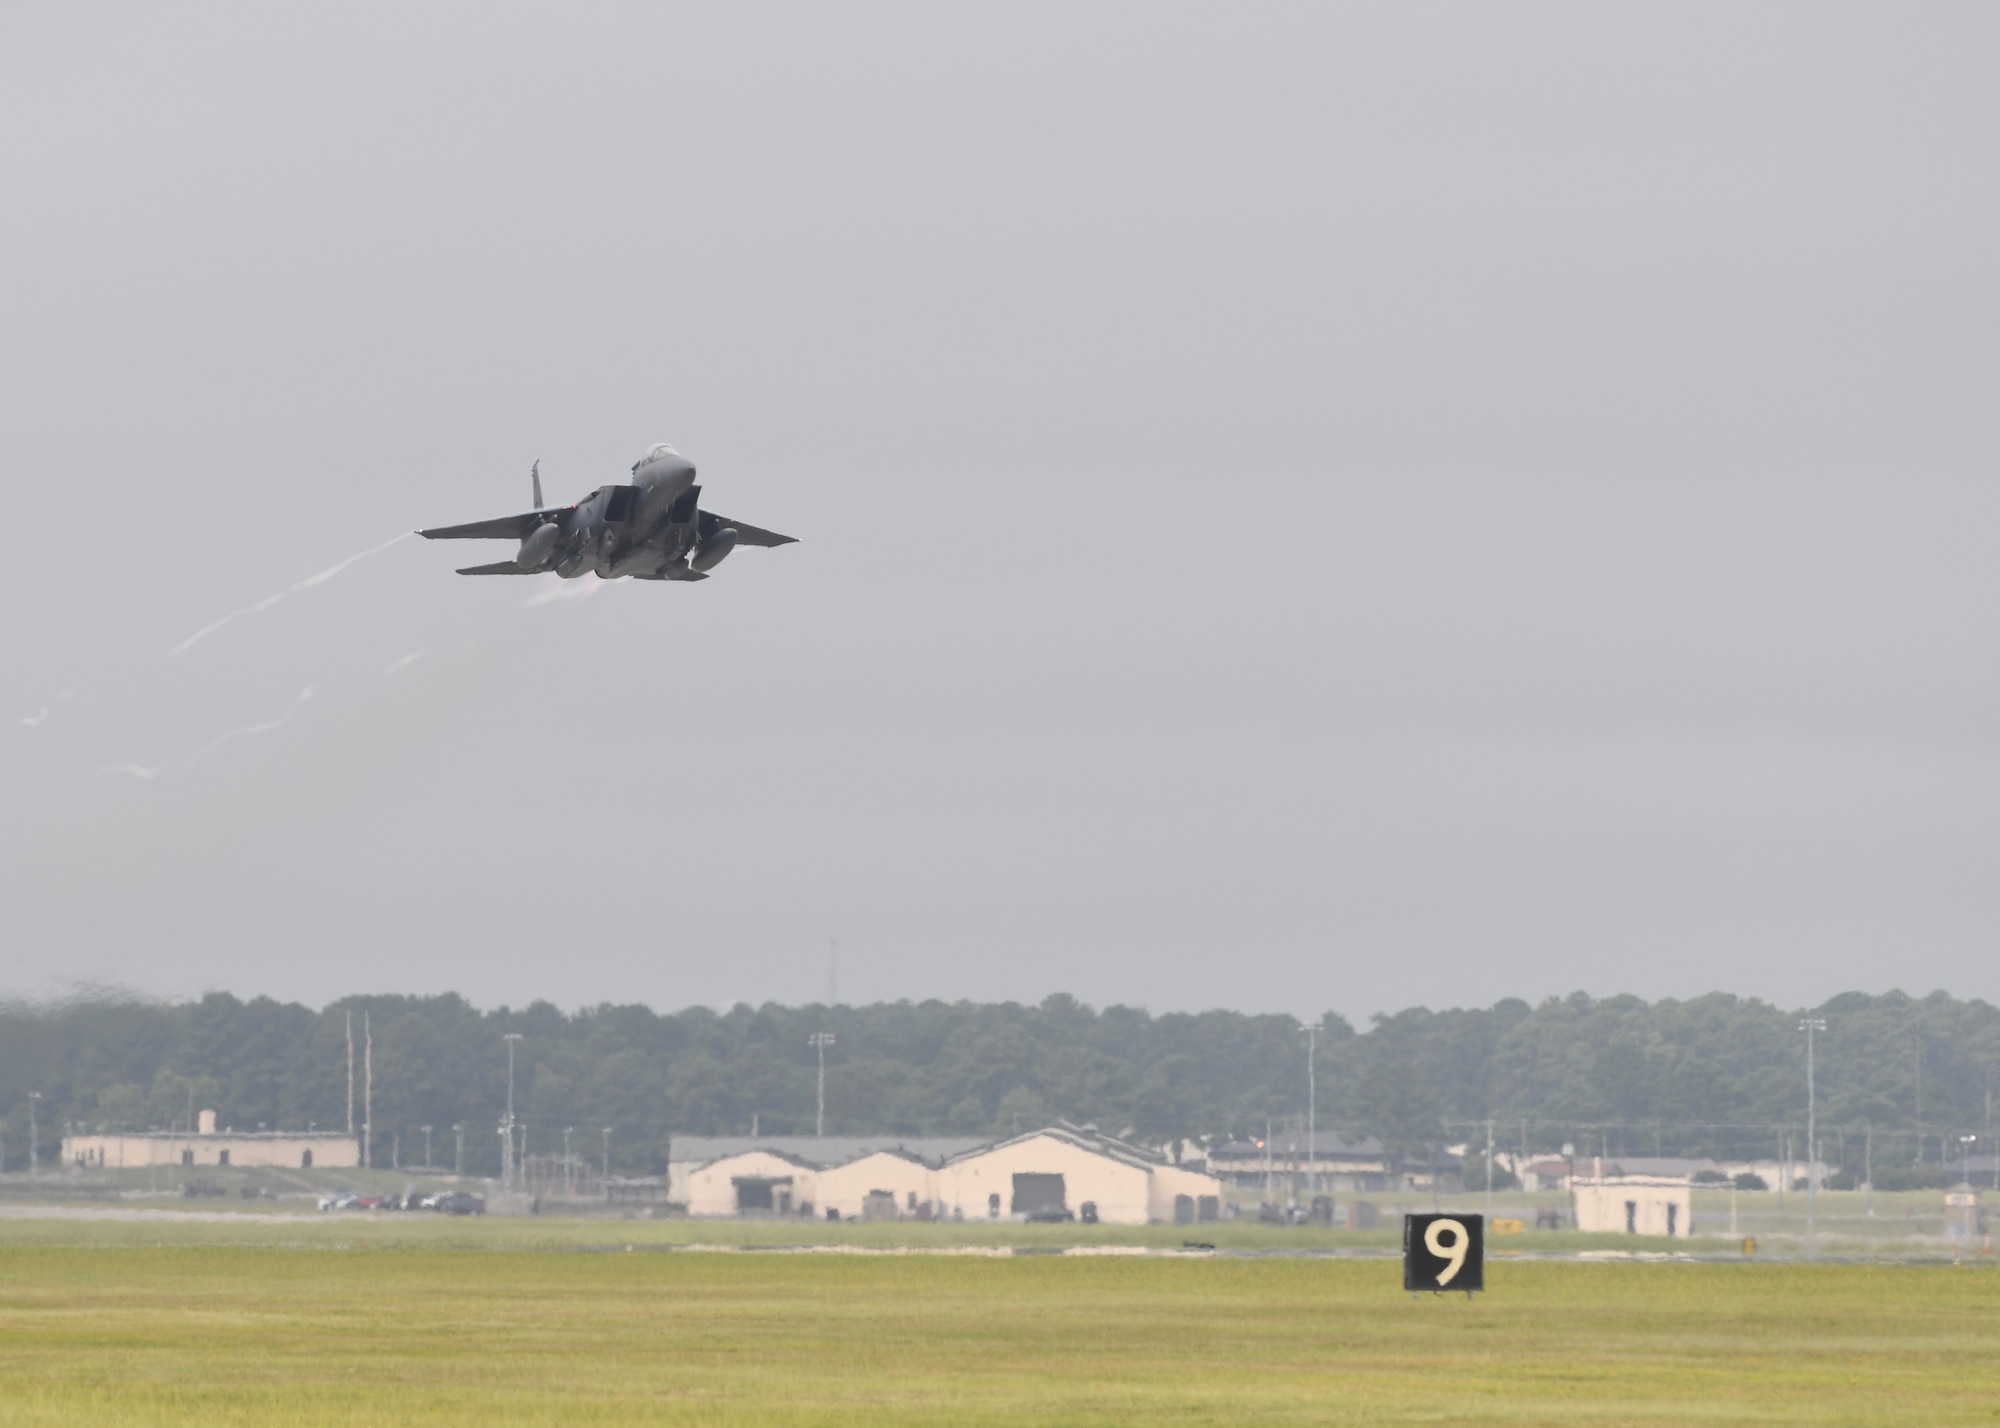 Seymour Johnson Air Force Base, N.C. — An F-15E Strike Eagle Assigned to the 334th Fighter Squadron takes off, September, 4, 2019, from Seymour Johnson AFB, North Carolina. More than 30 aircraft were repositioned to Tinker AFB, Oklahoma, as a precautionary measure to avoid severe weather associated with Hurricane Dorian. (U.S. Air Force photo by Staff Sgt. Michael Charles)